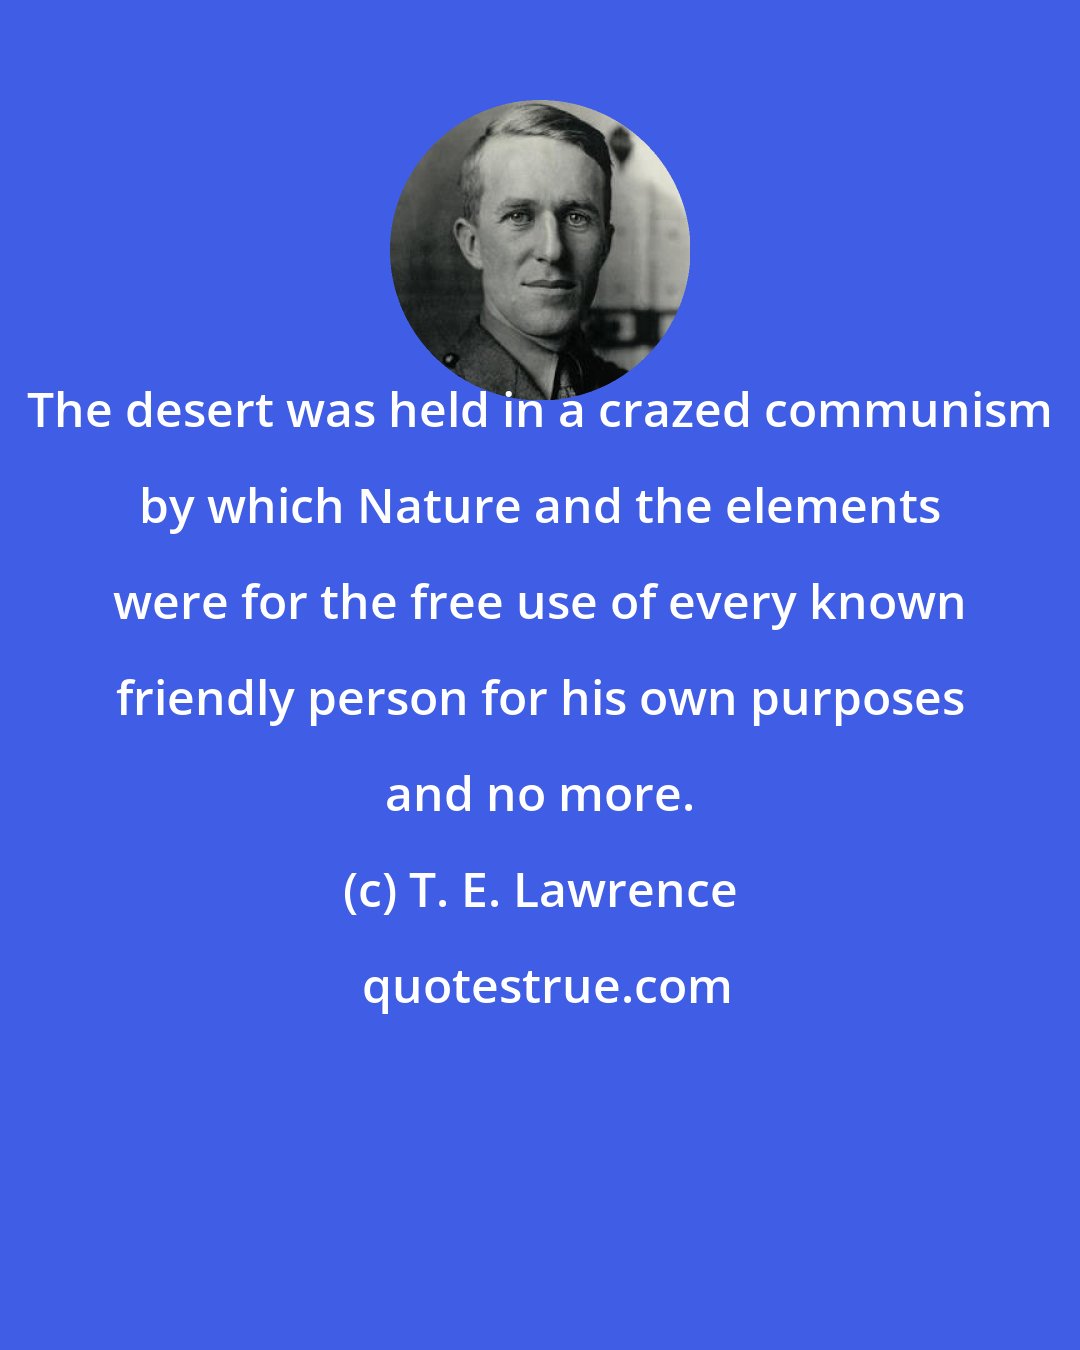 T. E. Lawrence: The desert was held in a crazed communism by which Nature and the elements were for the free use of every known friendly person for his own purposes and no more.